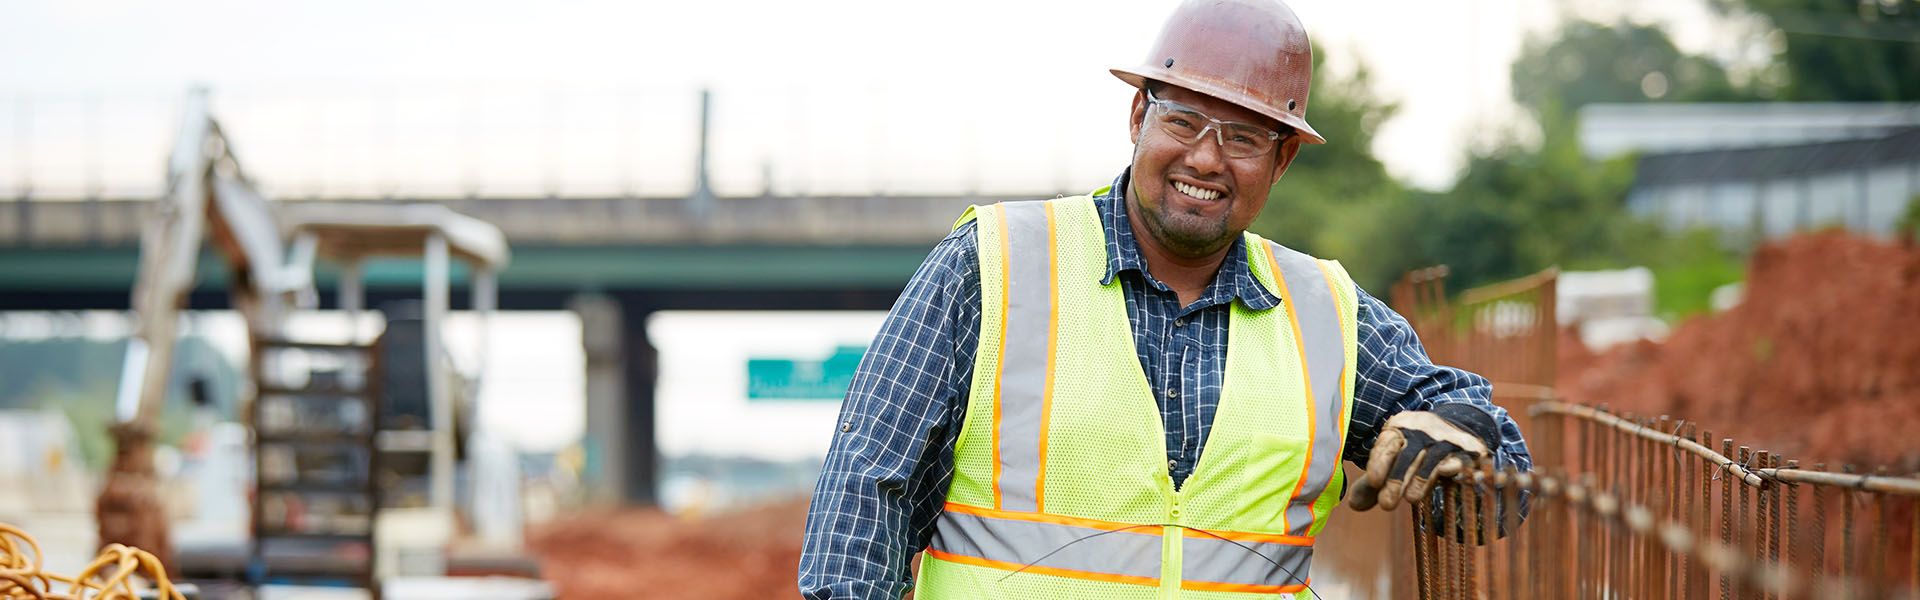 Luis Cervantes, a road construction worker smiles on site of his Georgia road job